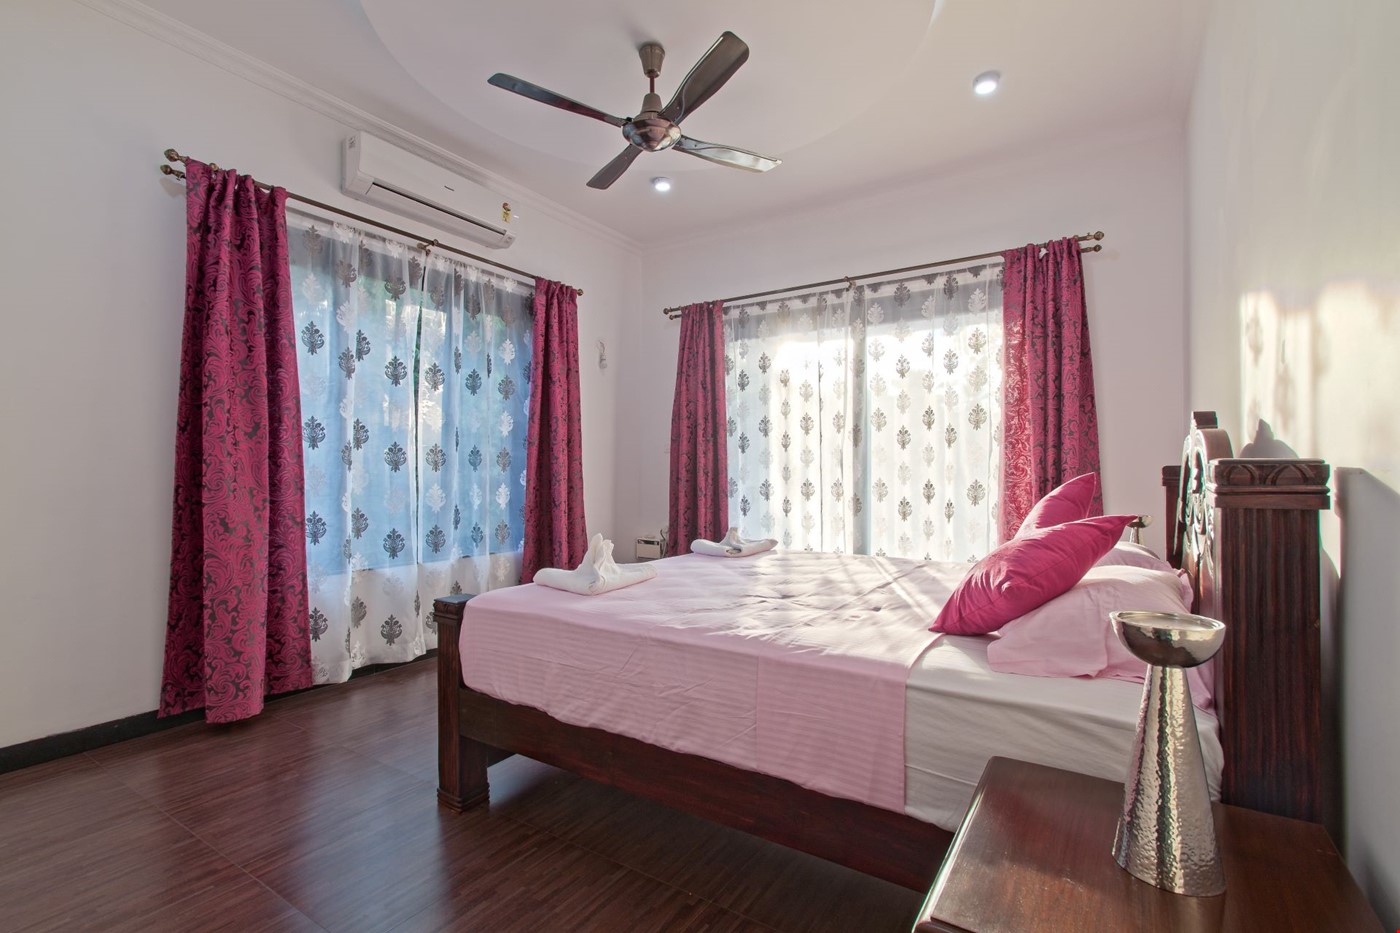 Hotel Calangute India nomad remote e7737b3f-f545-4a10-aa80-8aa860c03681_21LuxuryVillaWithAirConditionedRooms.jpg